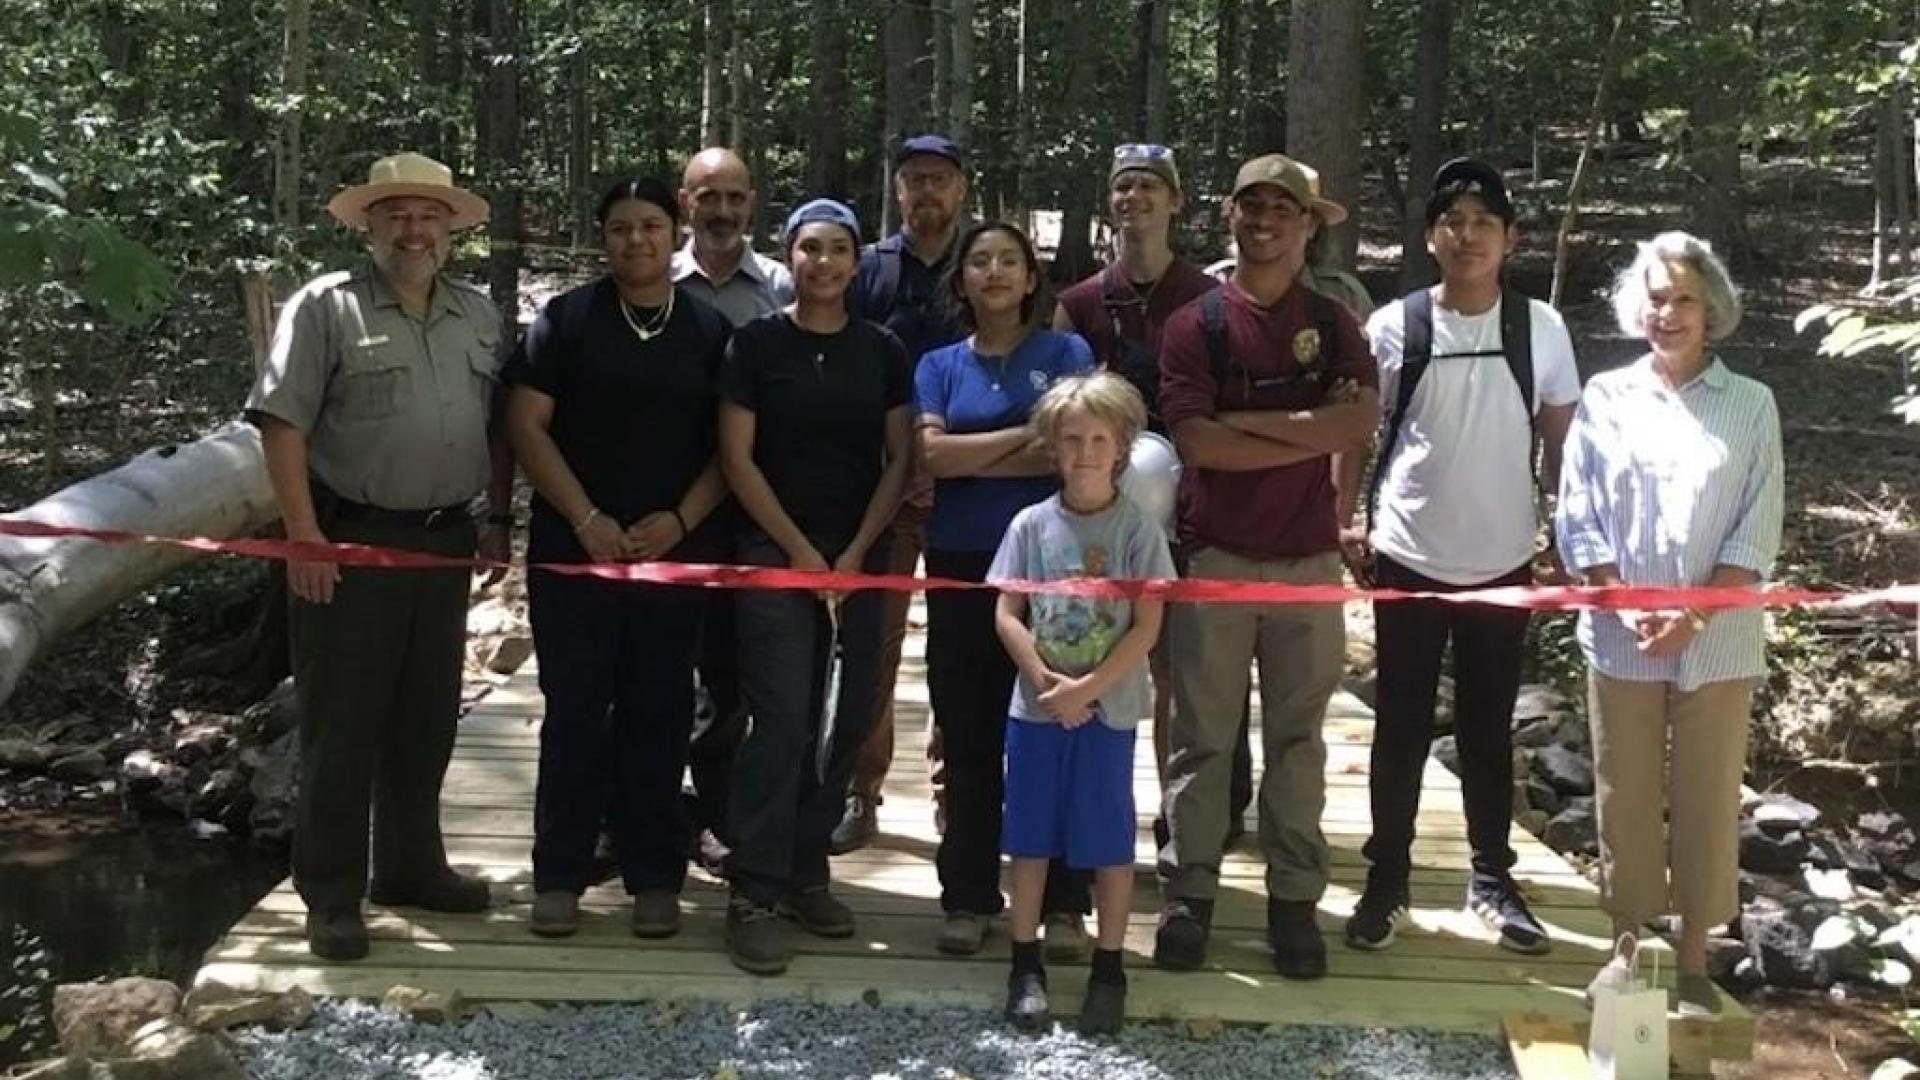 Twelve people standing on wooden bridge in the forest getting ready to cut the red ribbon to open the bridge to visitors.